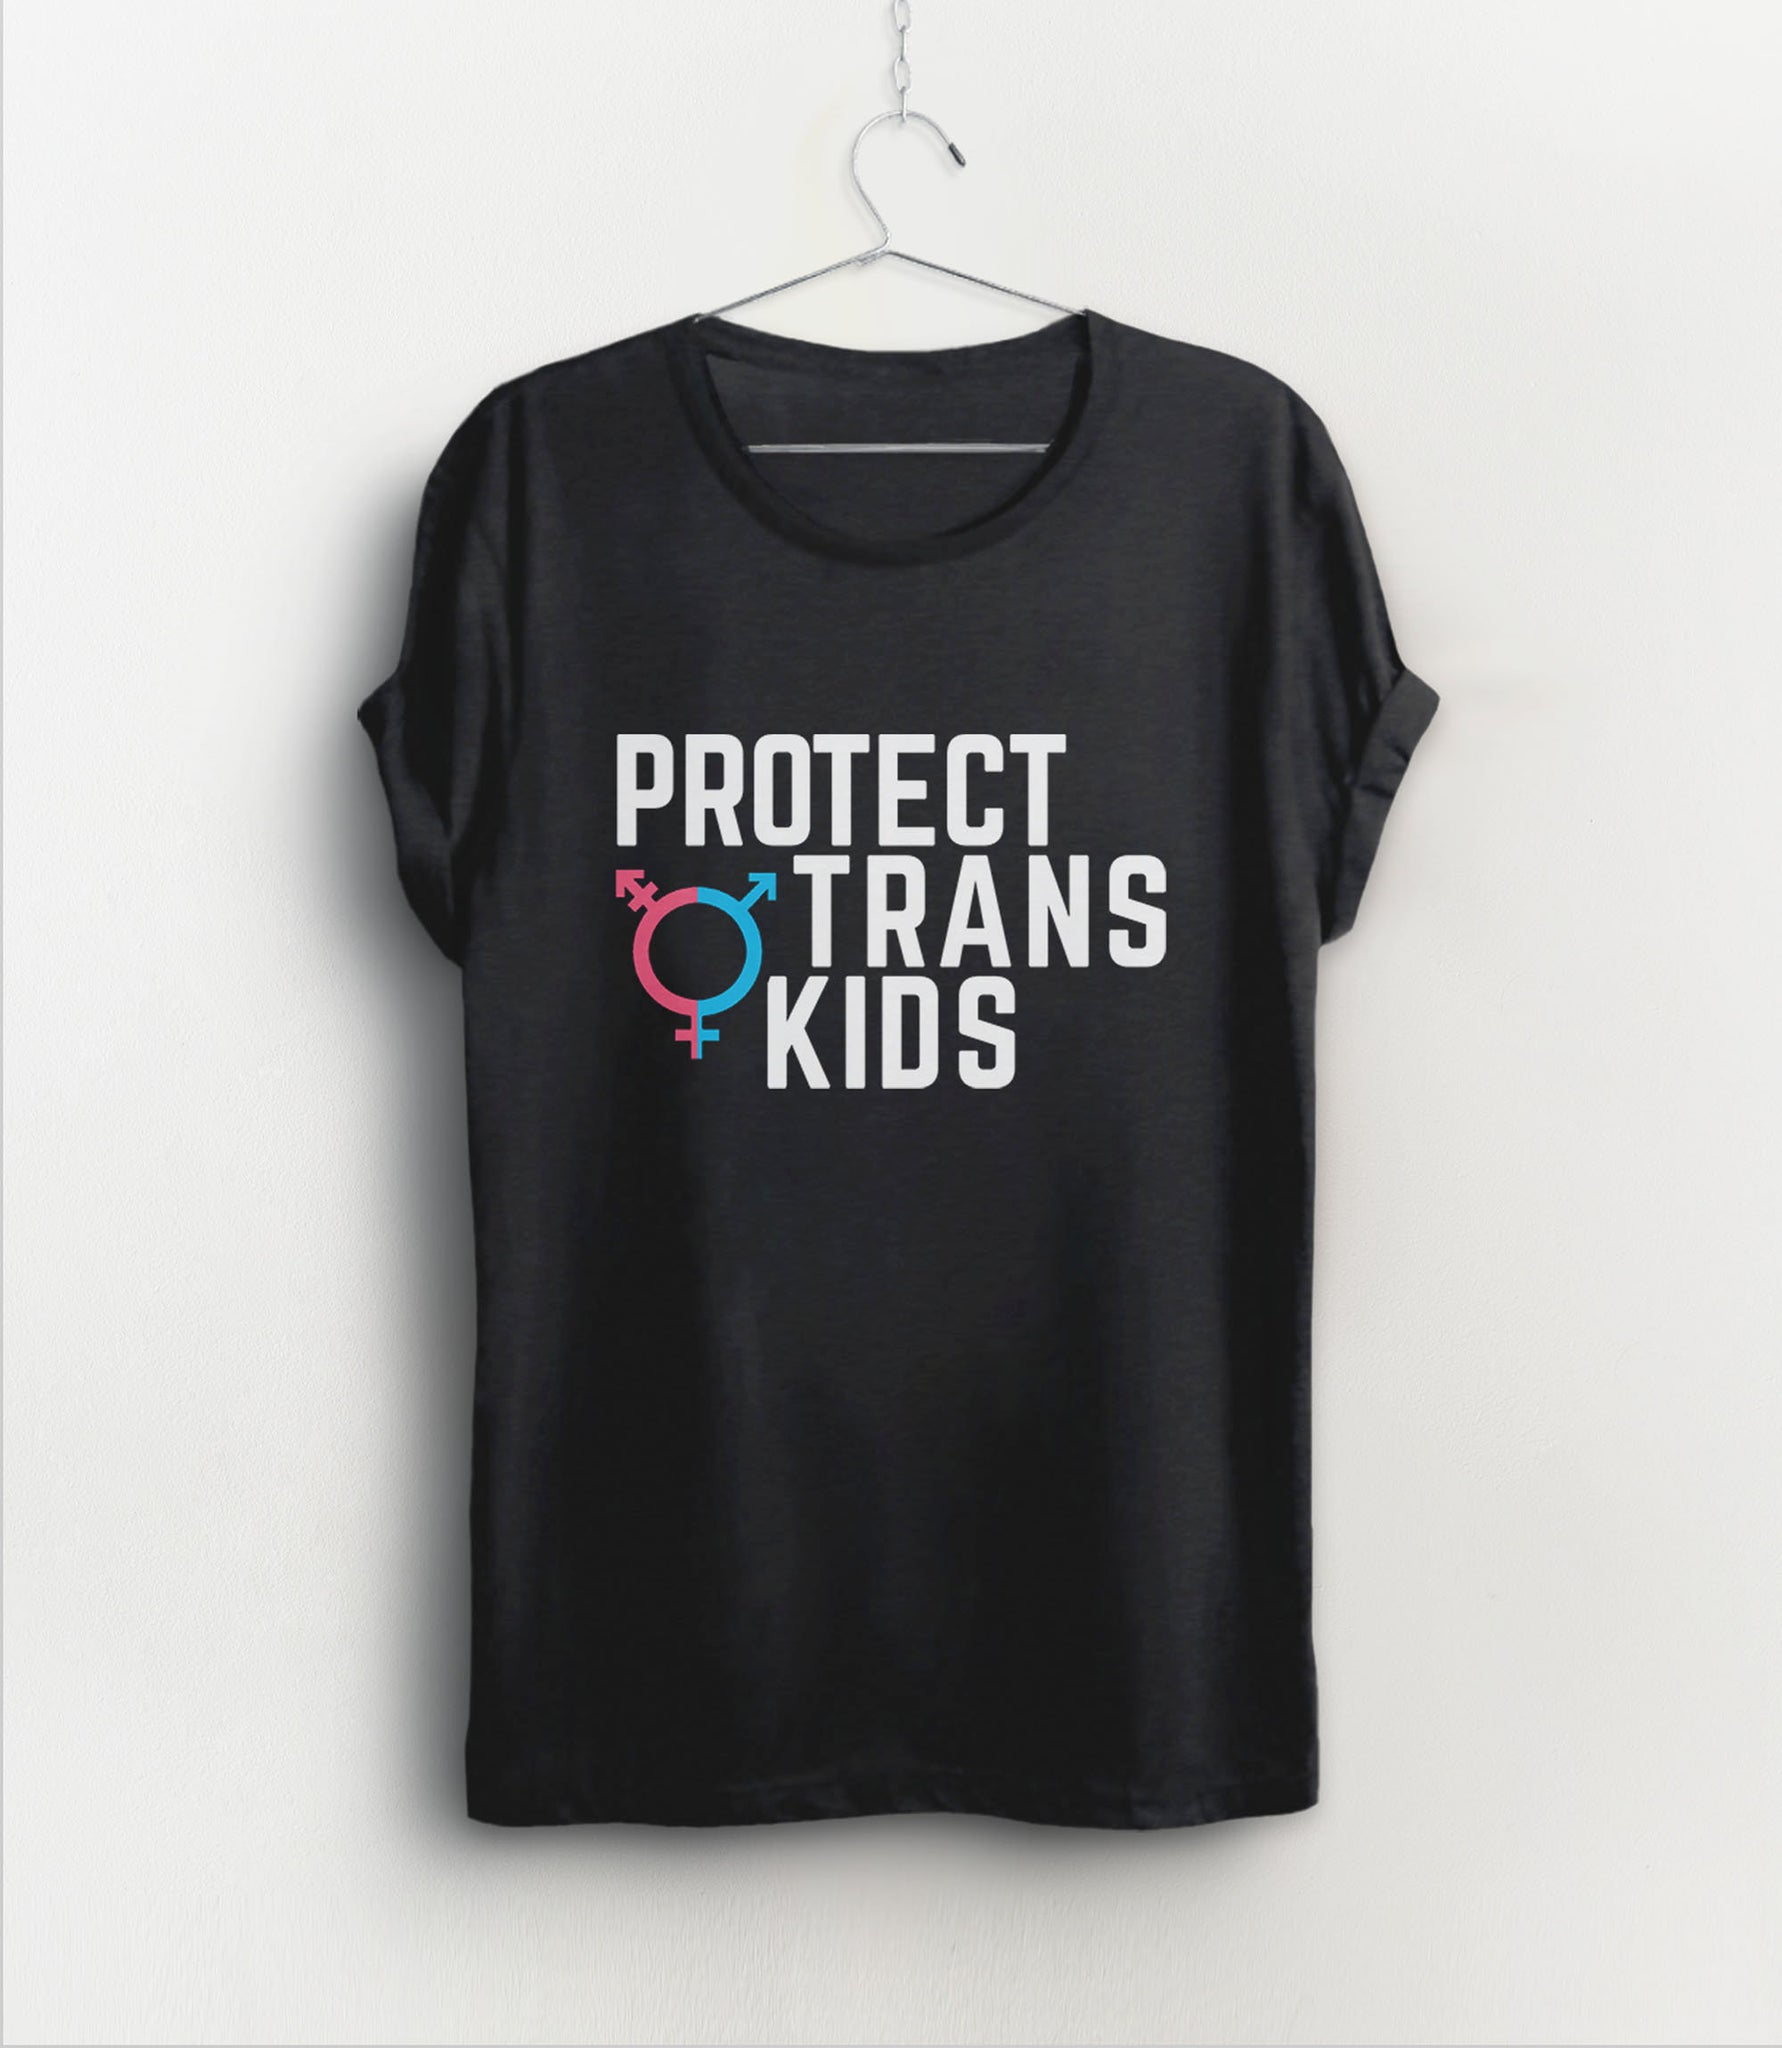 Protect Trans Kids T-Shirt, Navy Blue Unisex XS by BootsTees